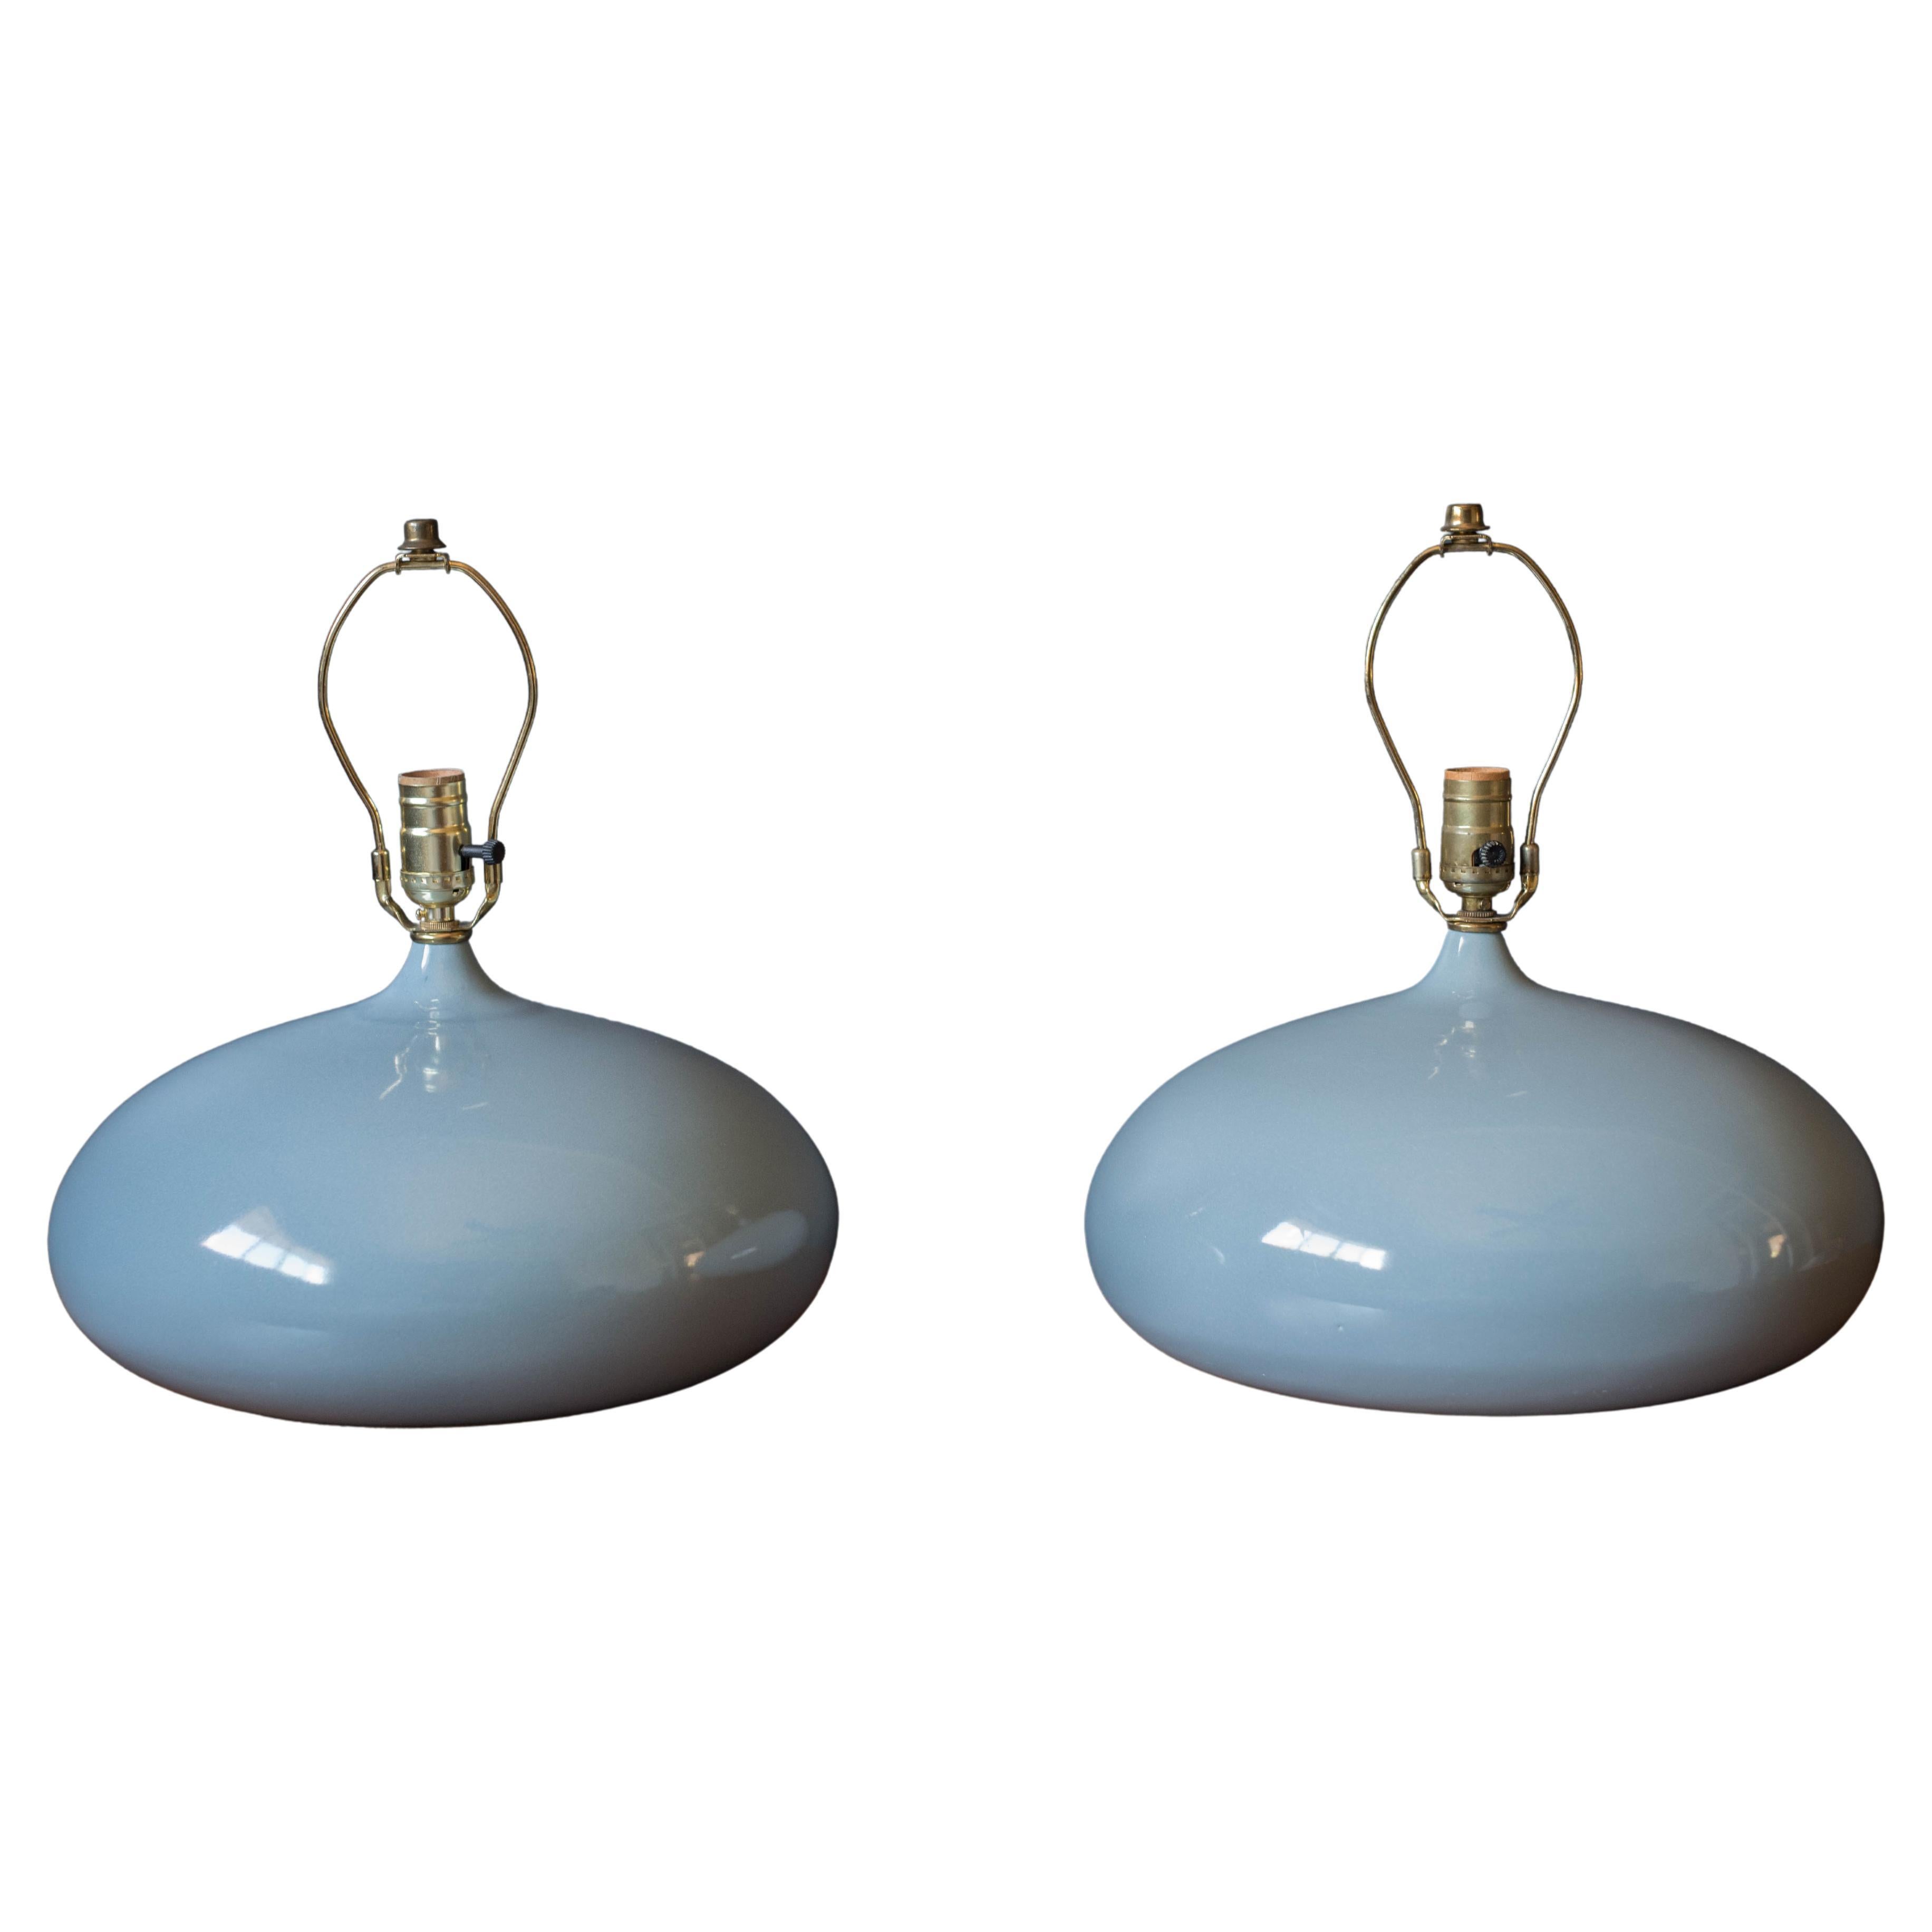 Pair of Sculptural Mid-Century Modern Round Gray Ceramic Table Lamps